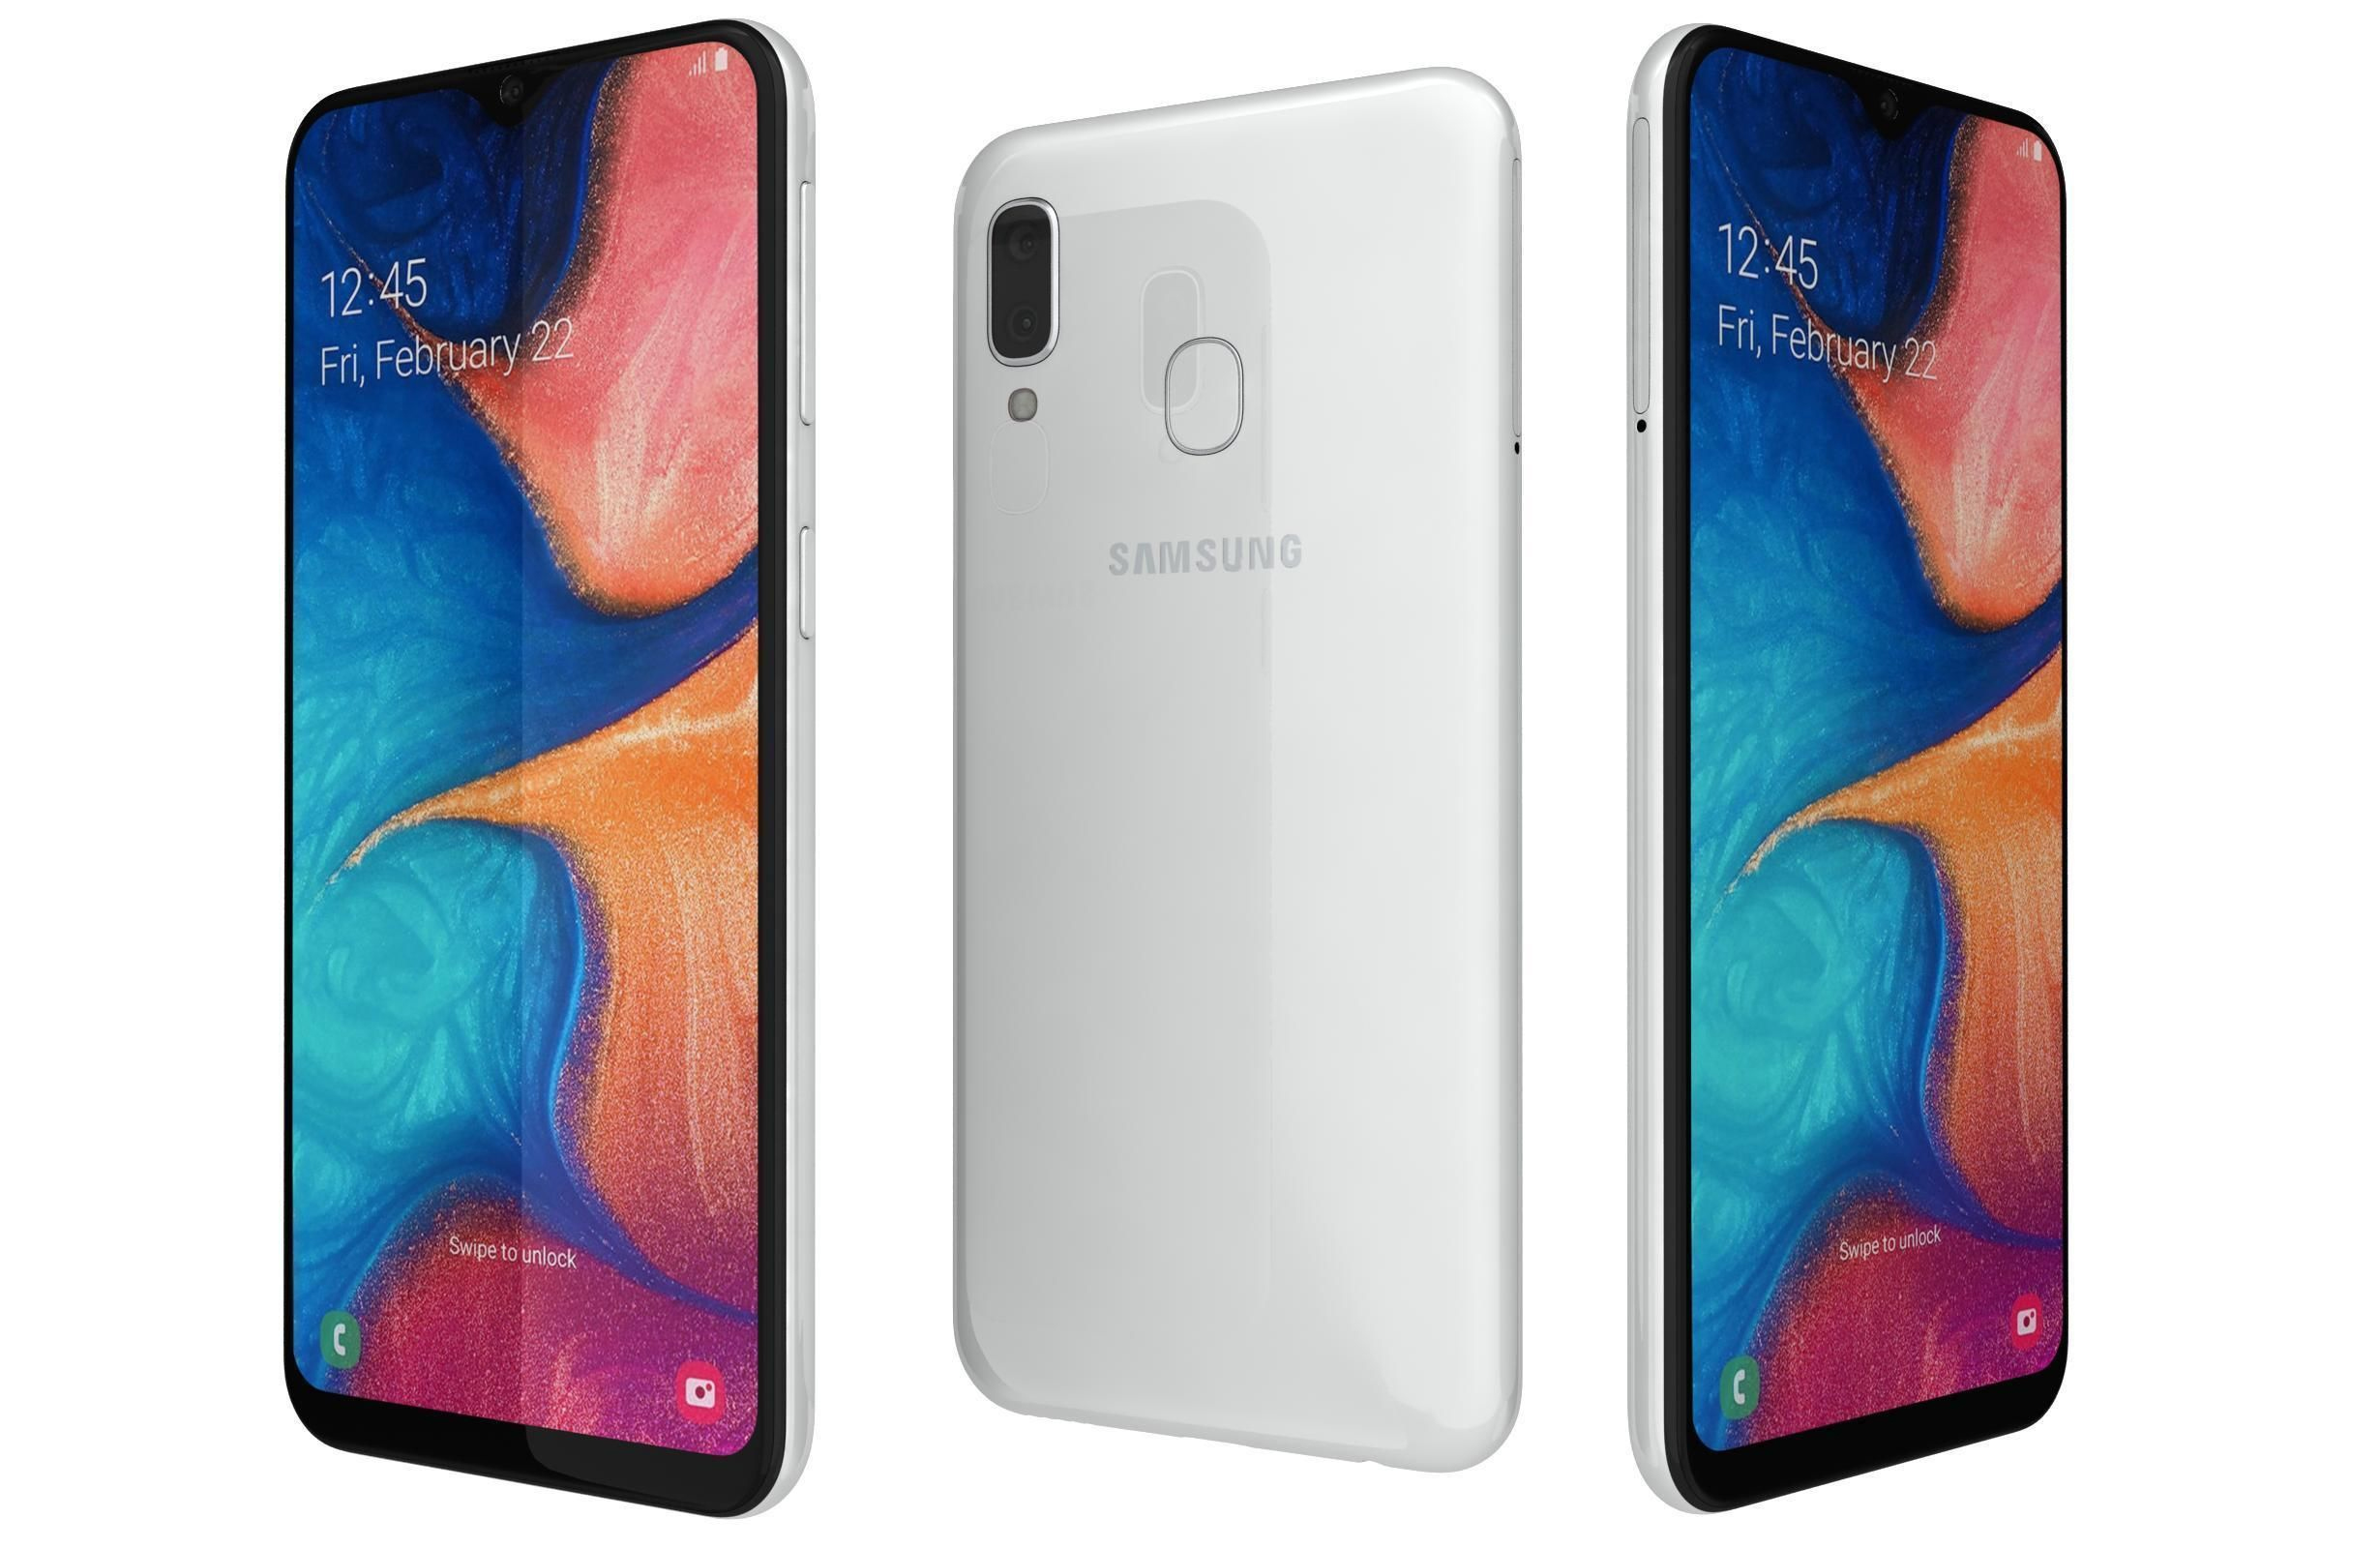 Samsung Galaxy A20e Phone Specifications And Price Deep Specs